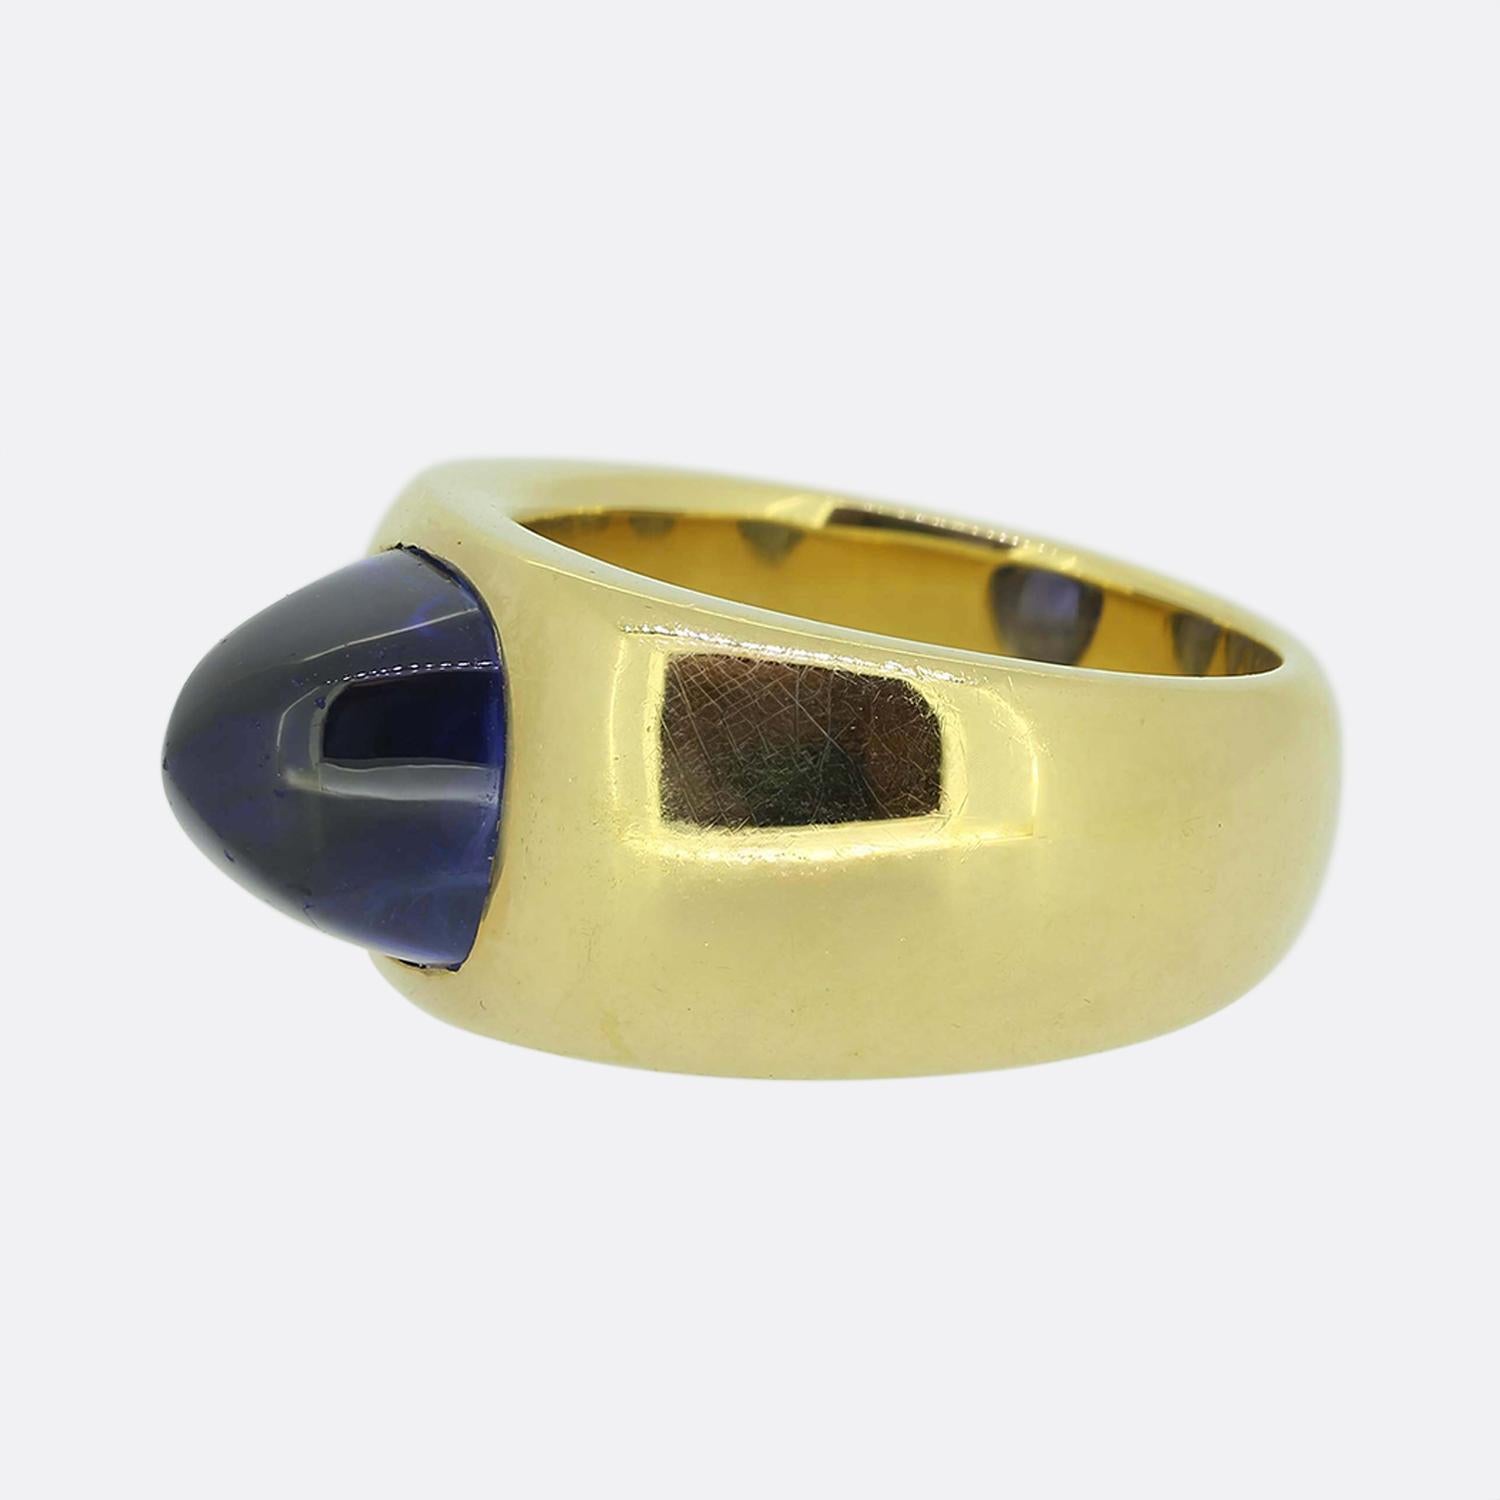 Here we have a gorgeous single stone sapphire ring. This piece has been crafted from a warm 18ct yellow gold and showcases a single sugar loaf sapphire at the centre possessing a gleaming mid-night blue colour tone. This dusky blue stone has been